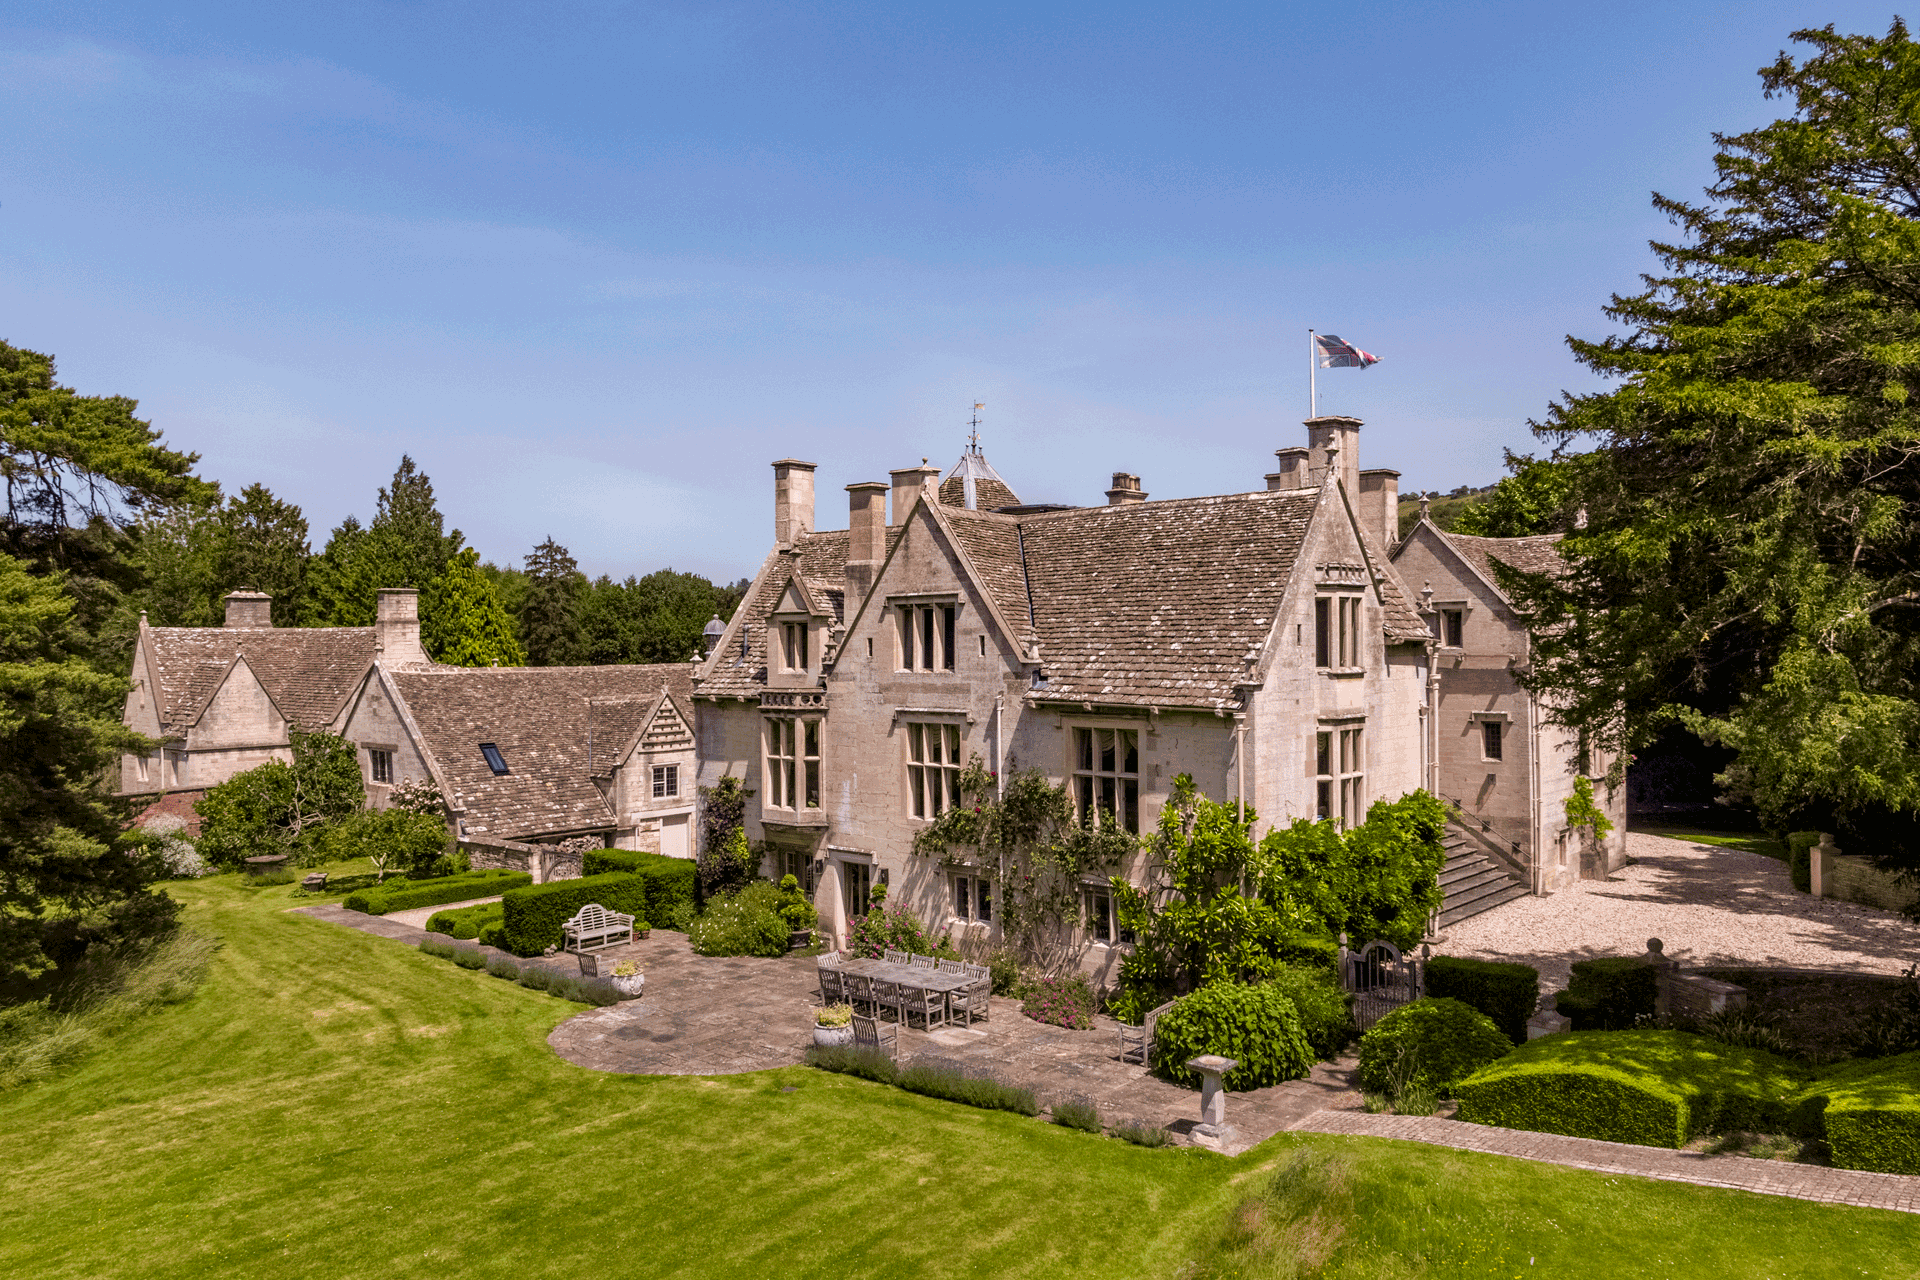 Exterior of The Old Priory, a Cotswold manor house.